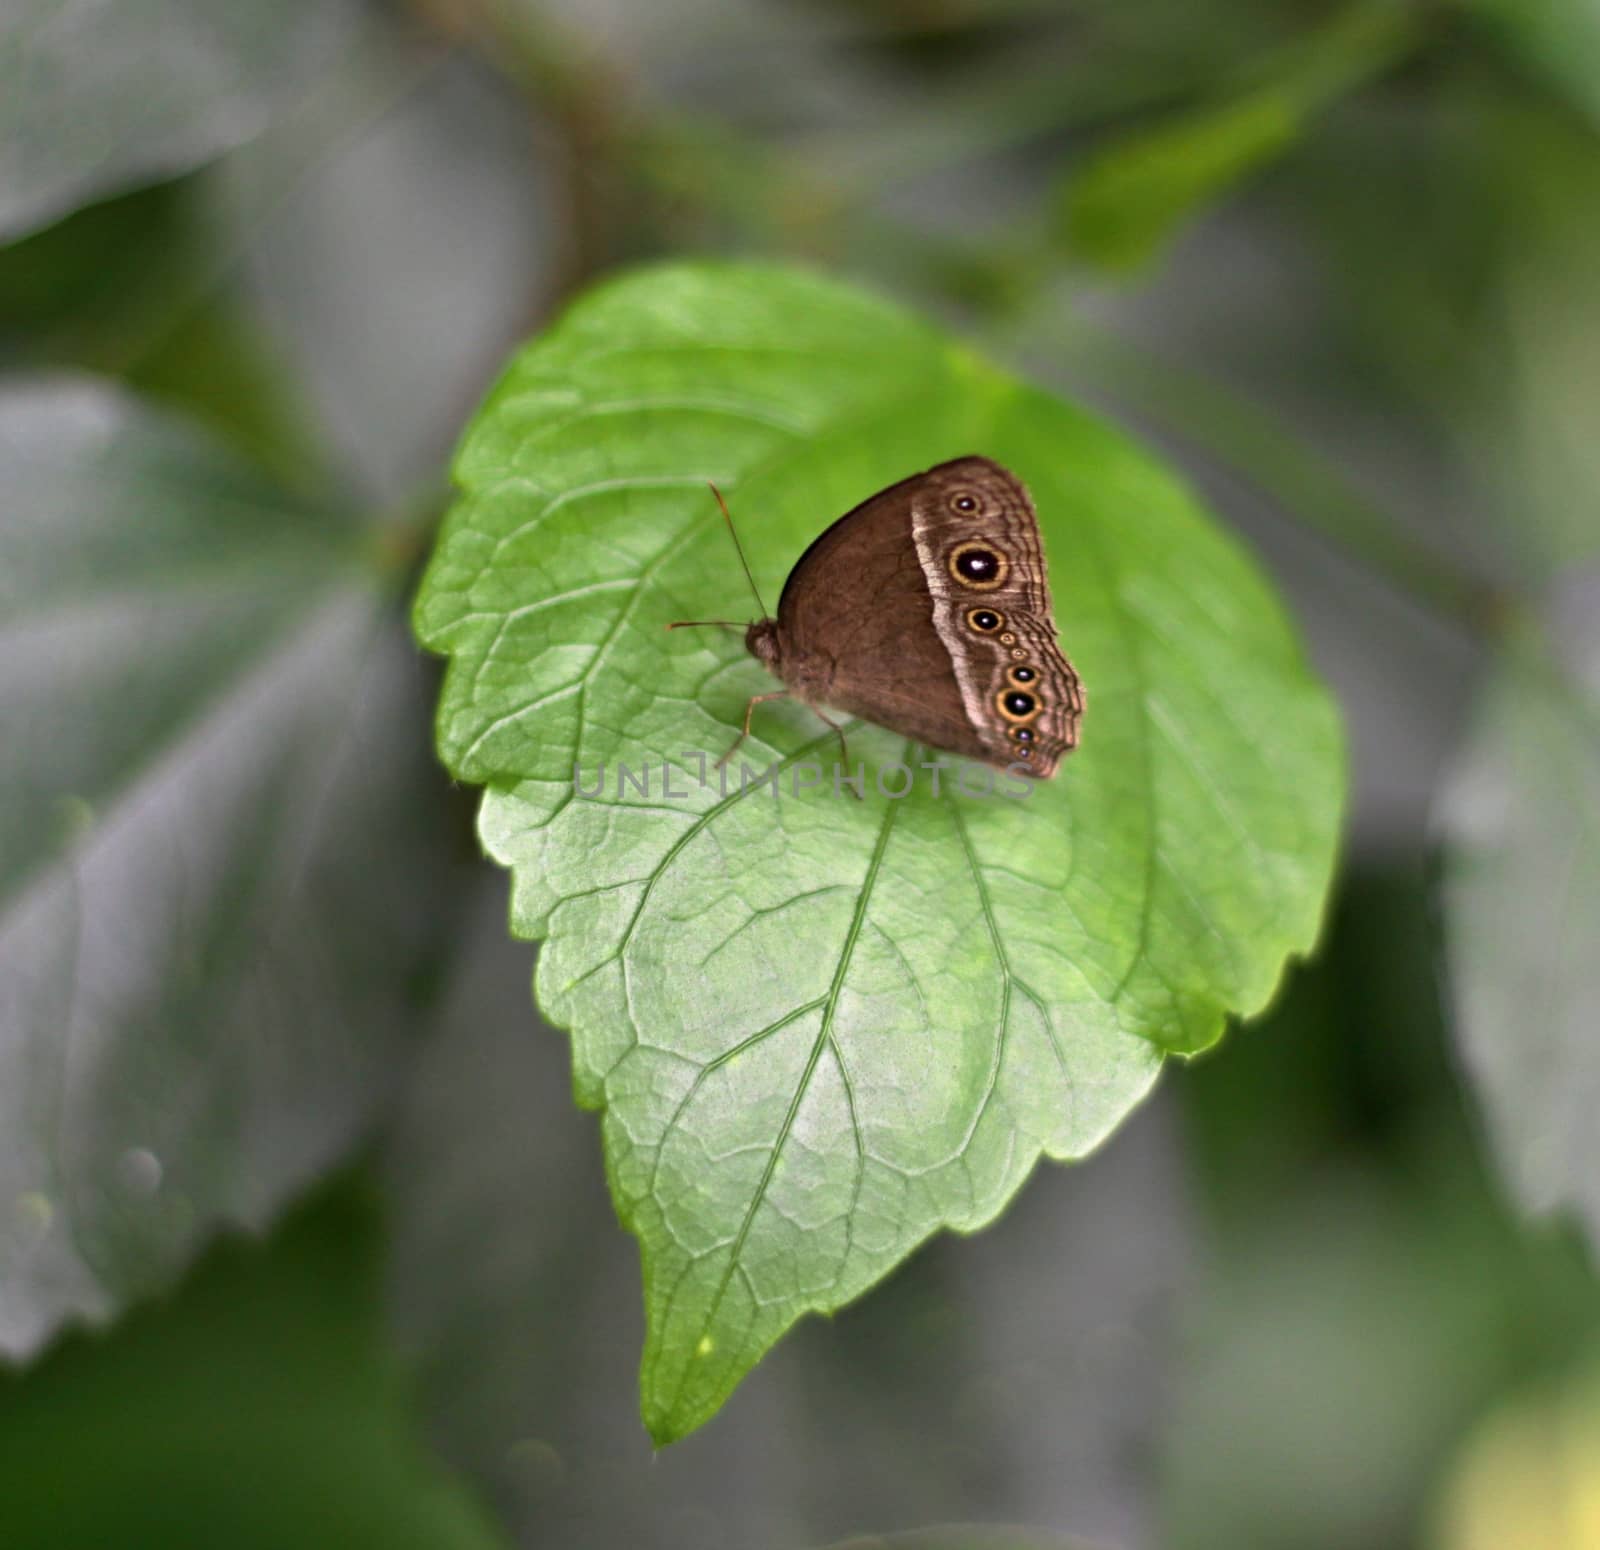 Brown butterfly on green leaves by jnerad